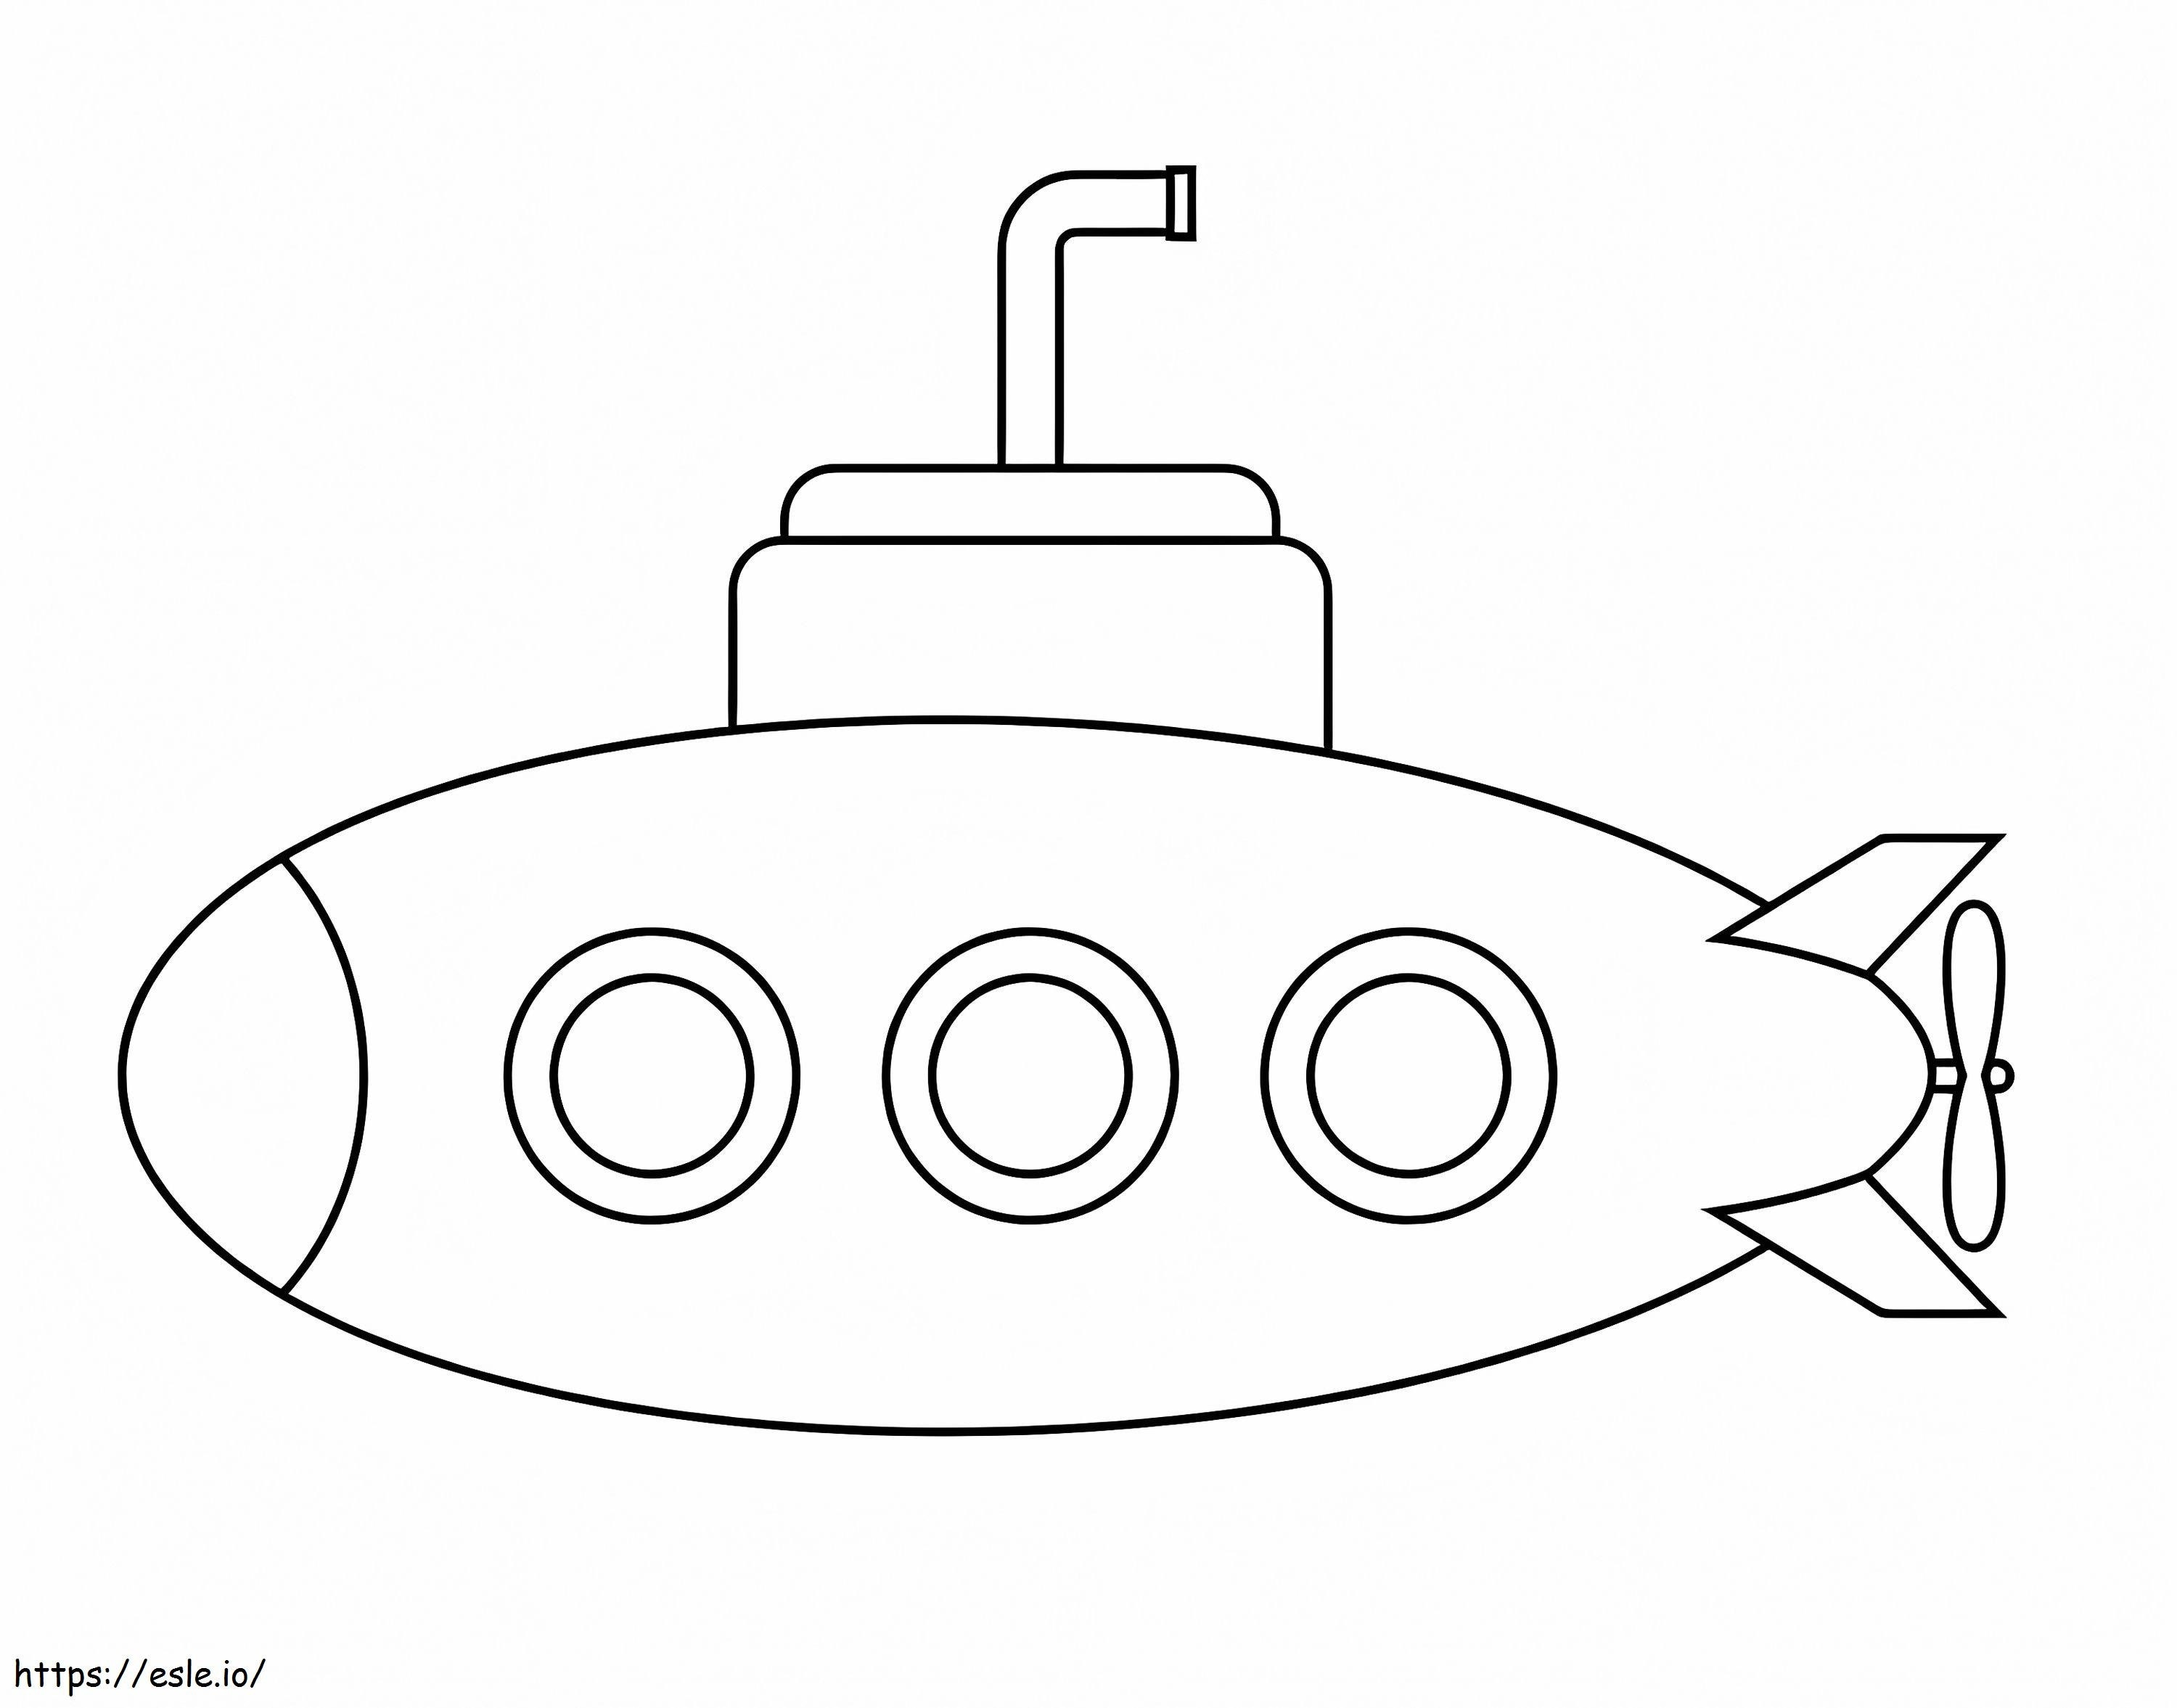 Easy Submarine coloring page